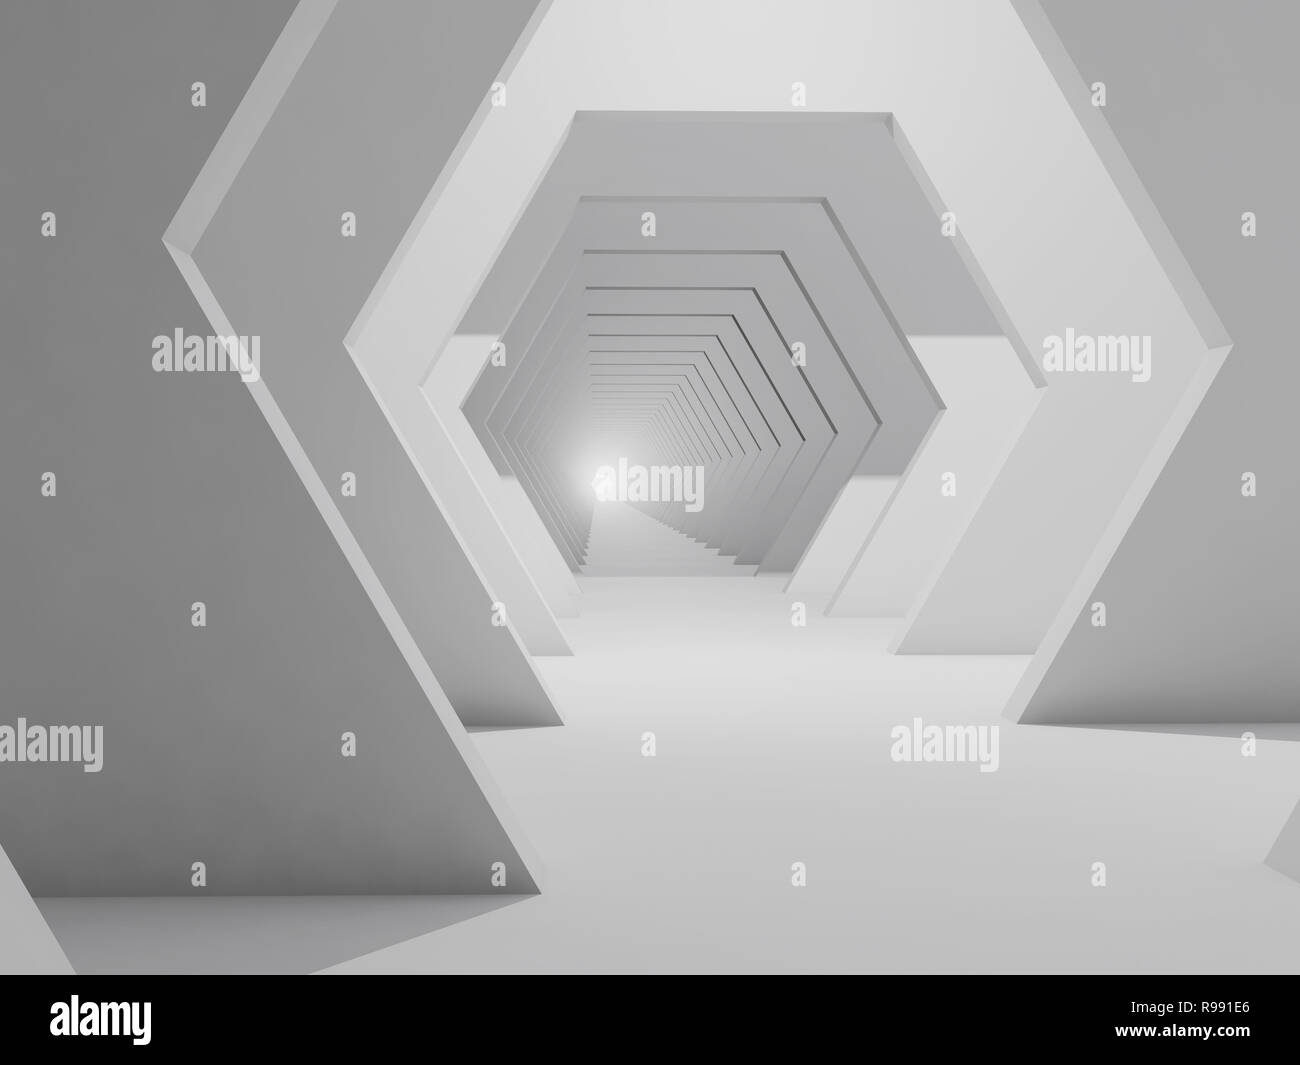 Abstract white interior background, corridor with hexagonal elements. 3d render illustration Stock Photo